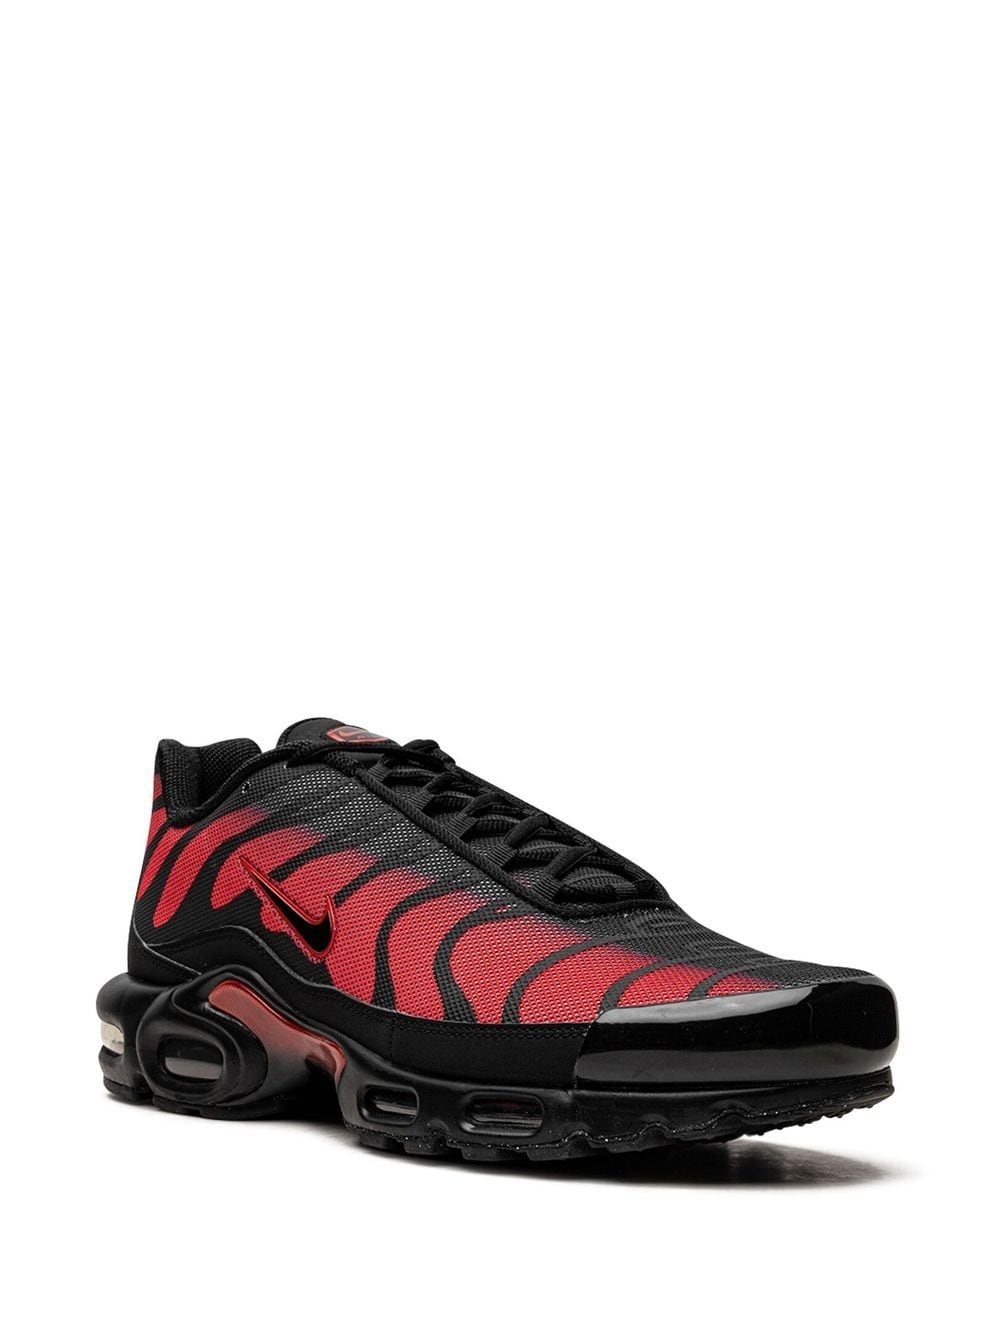 Air Max Plus "Bred Reflective" sneakers - 2